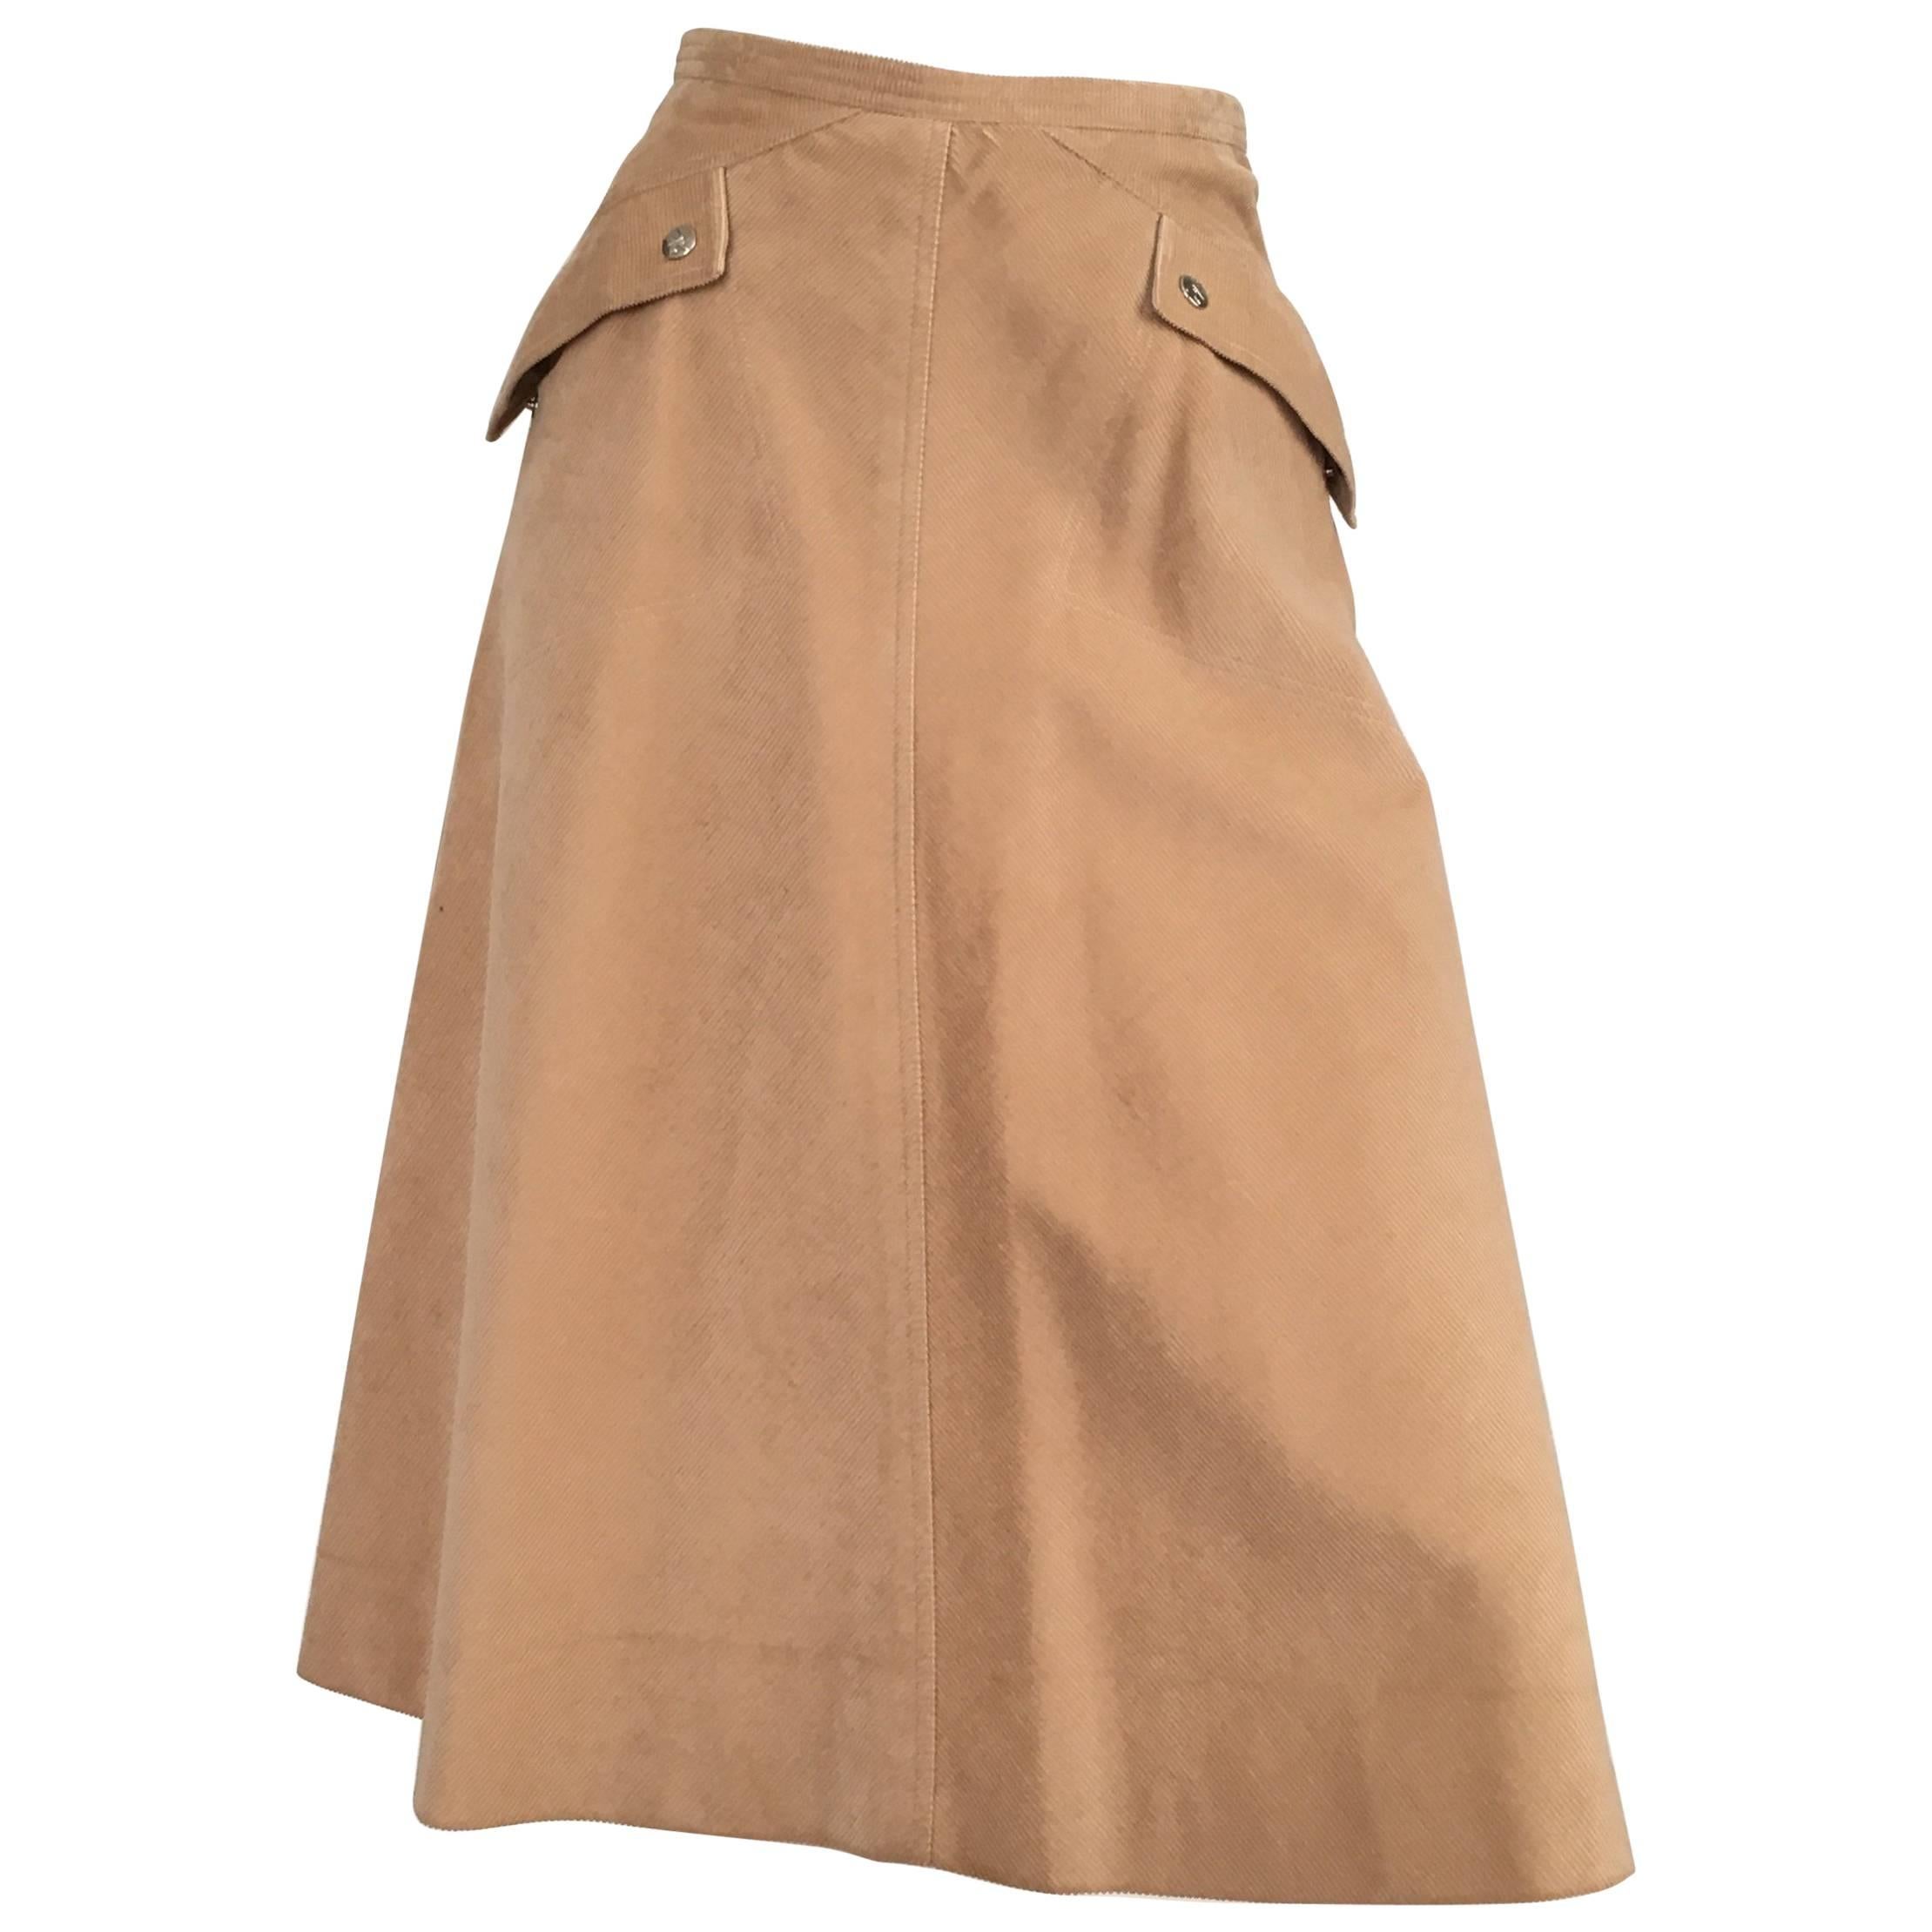 Courreges 1970s Khaki Corduroy A-Line Skirt With Pockets Size 4. For Sale